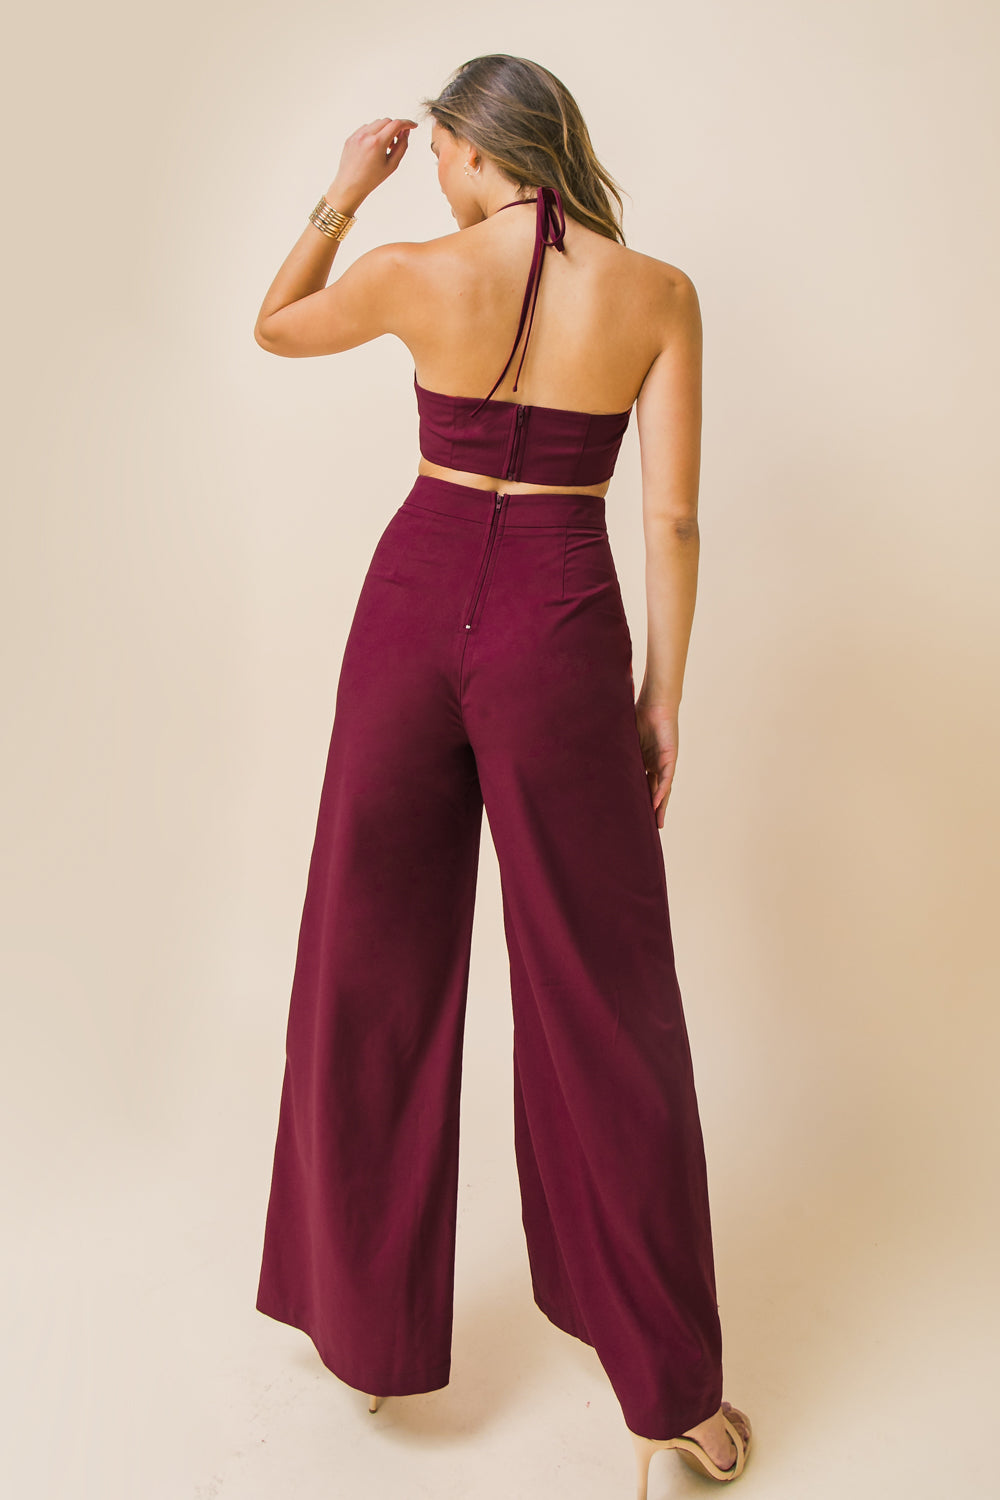 A DAY IN PARIS WOVEN JUMPSUIT